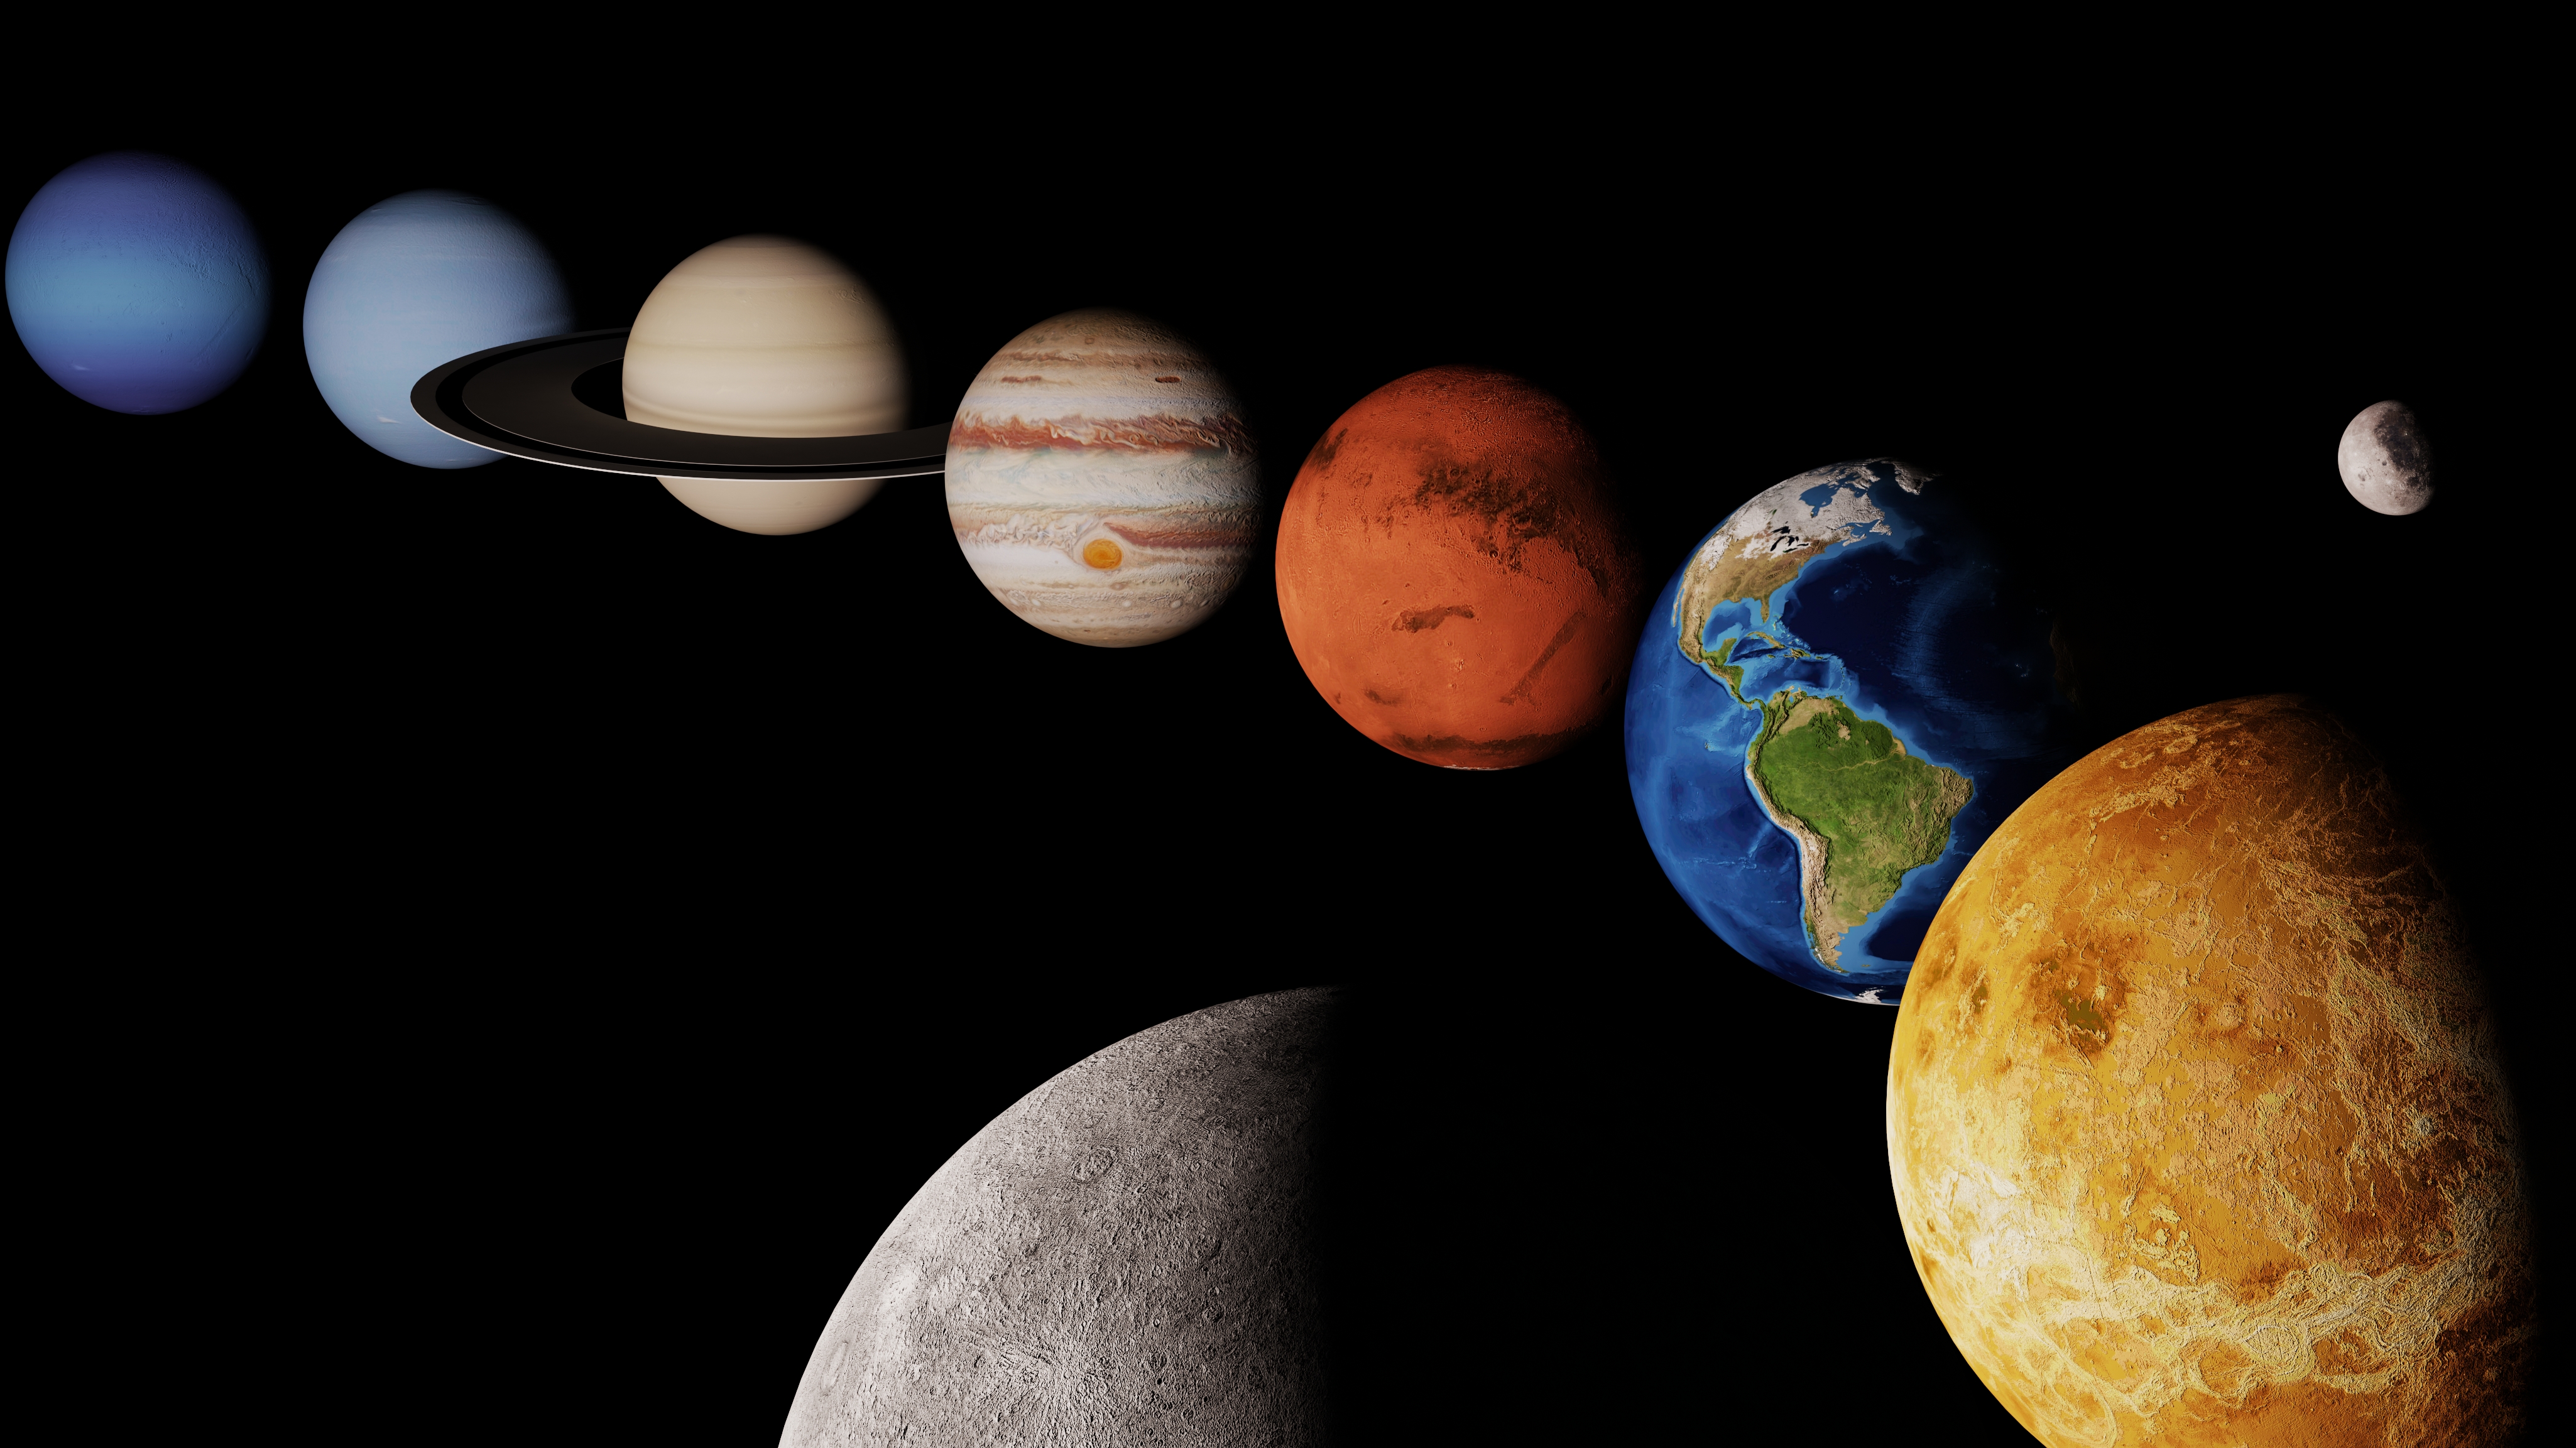 10 4K Solar System Wallpapers Background Images. wall.alphacoders.com. 